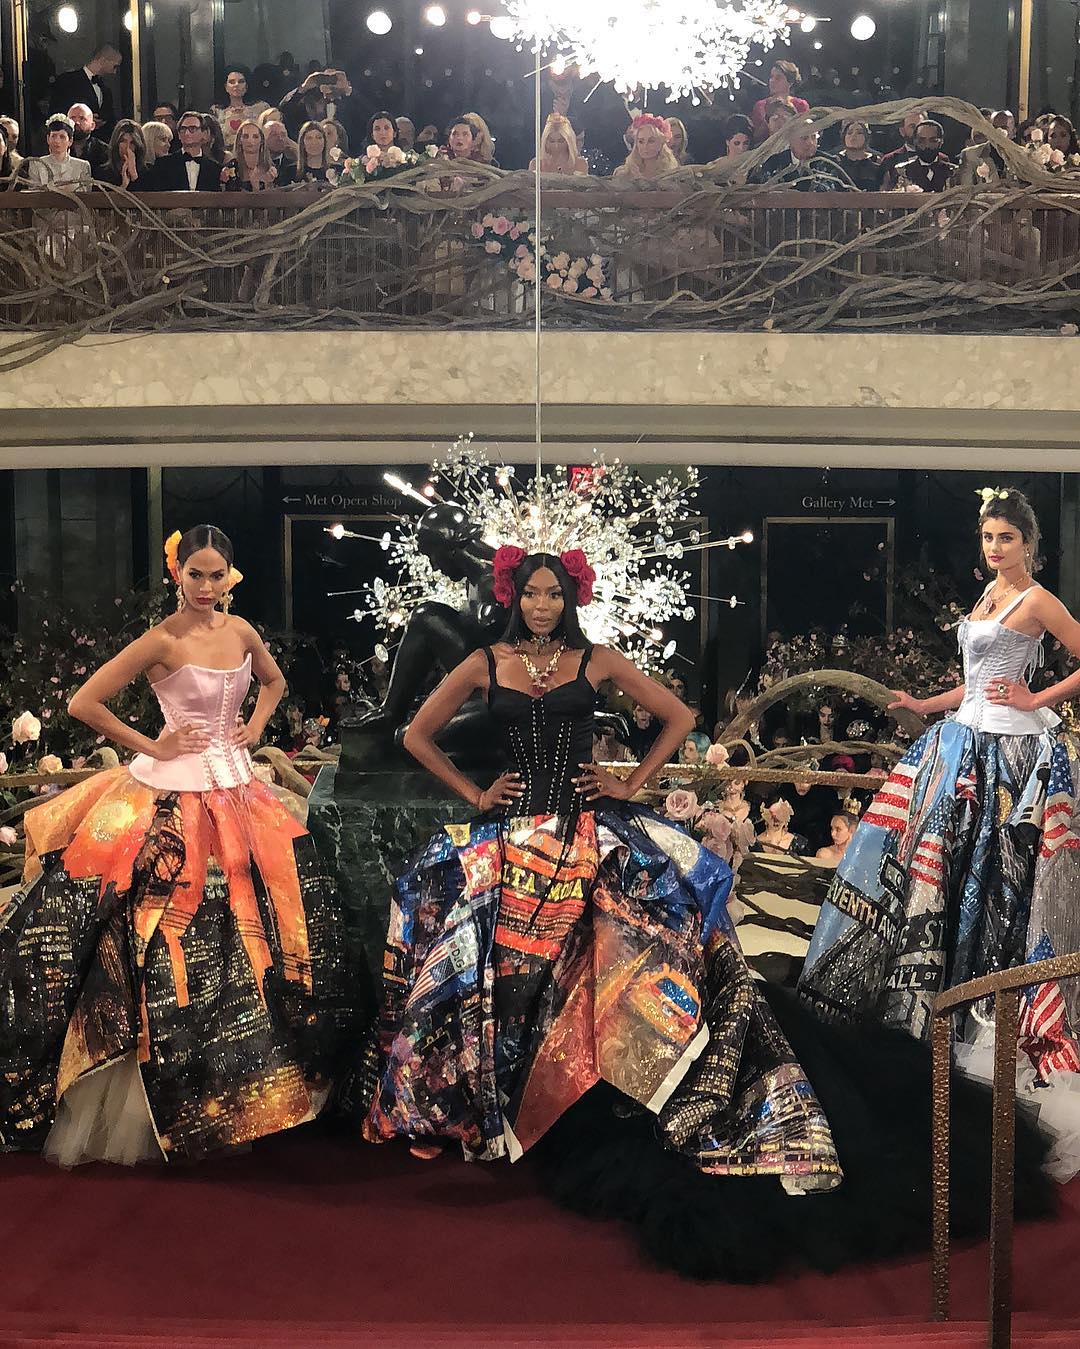 dolce-and-gabbana-presents-an-epic-alta-moda-couture-collection-in-new-york-city